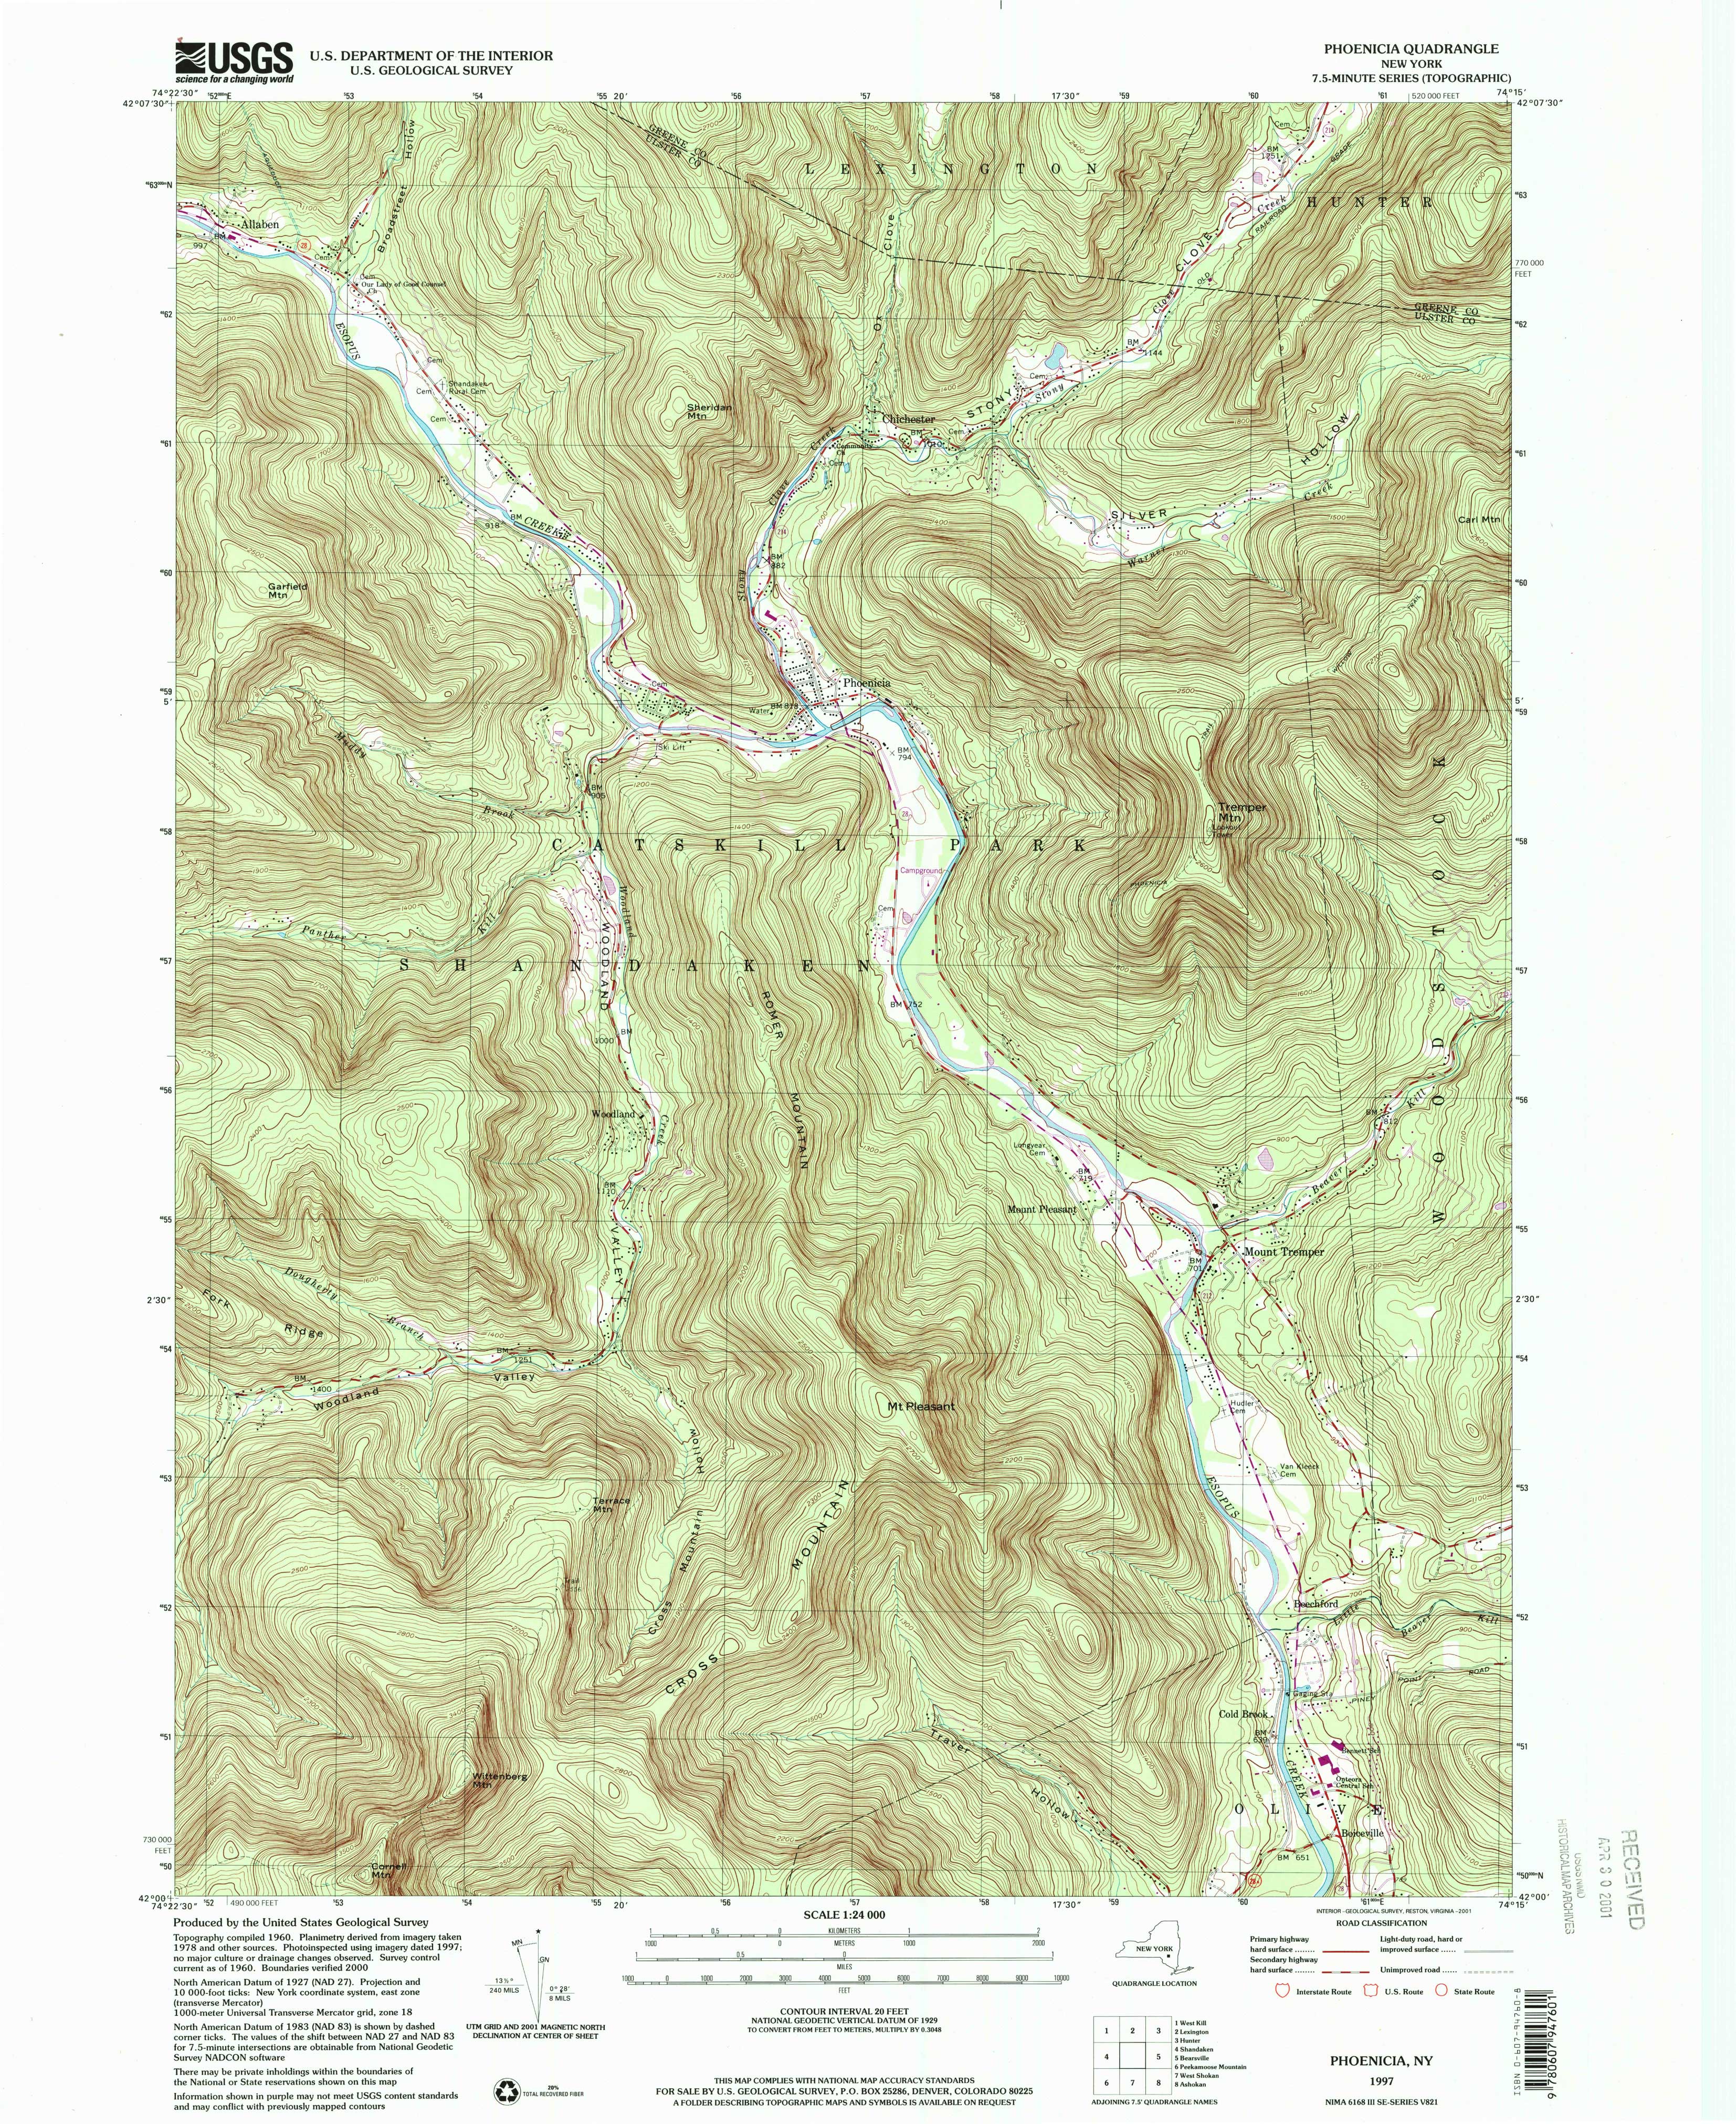 1997 USGS topographical map of Phoenicia